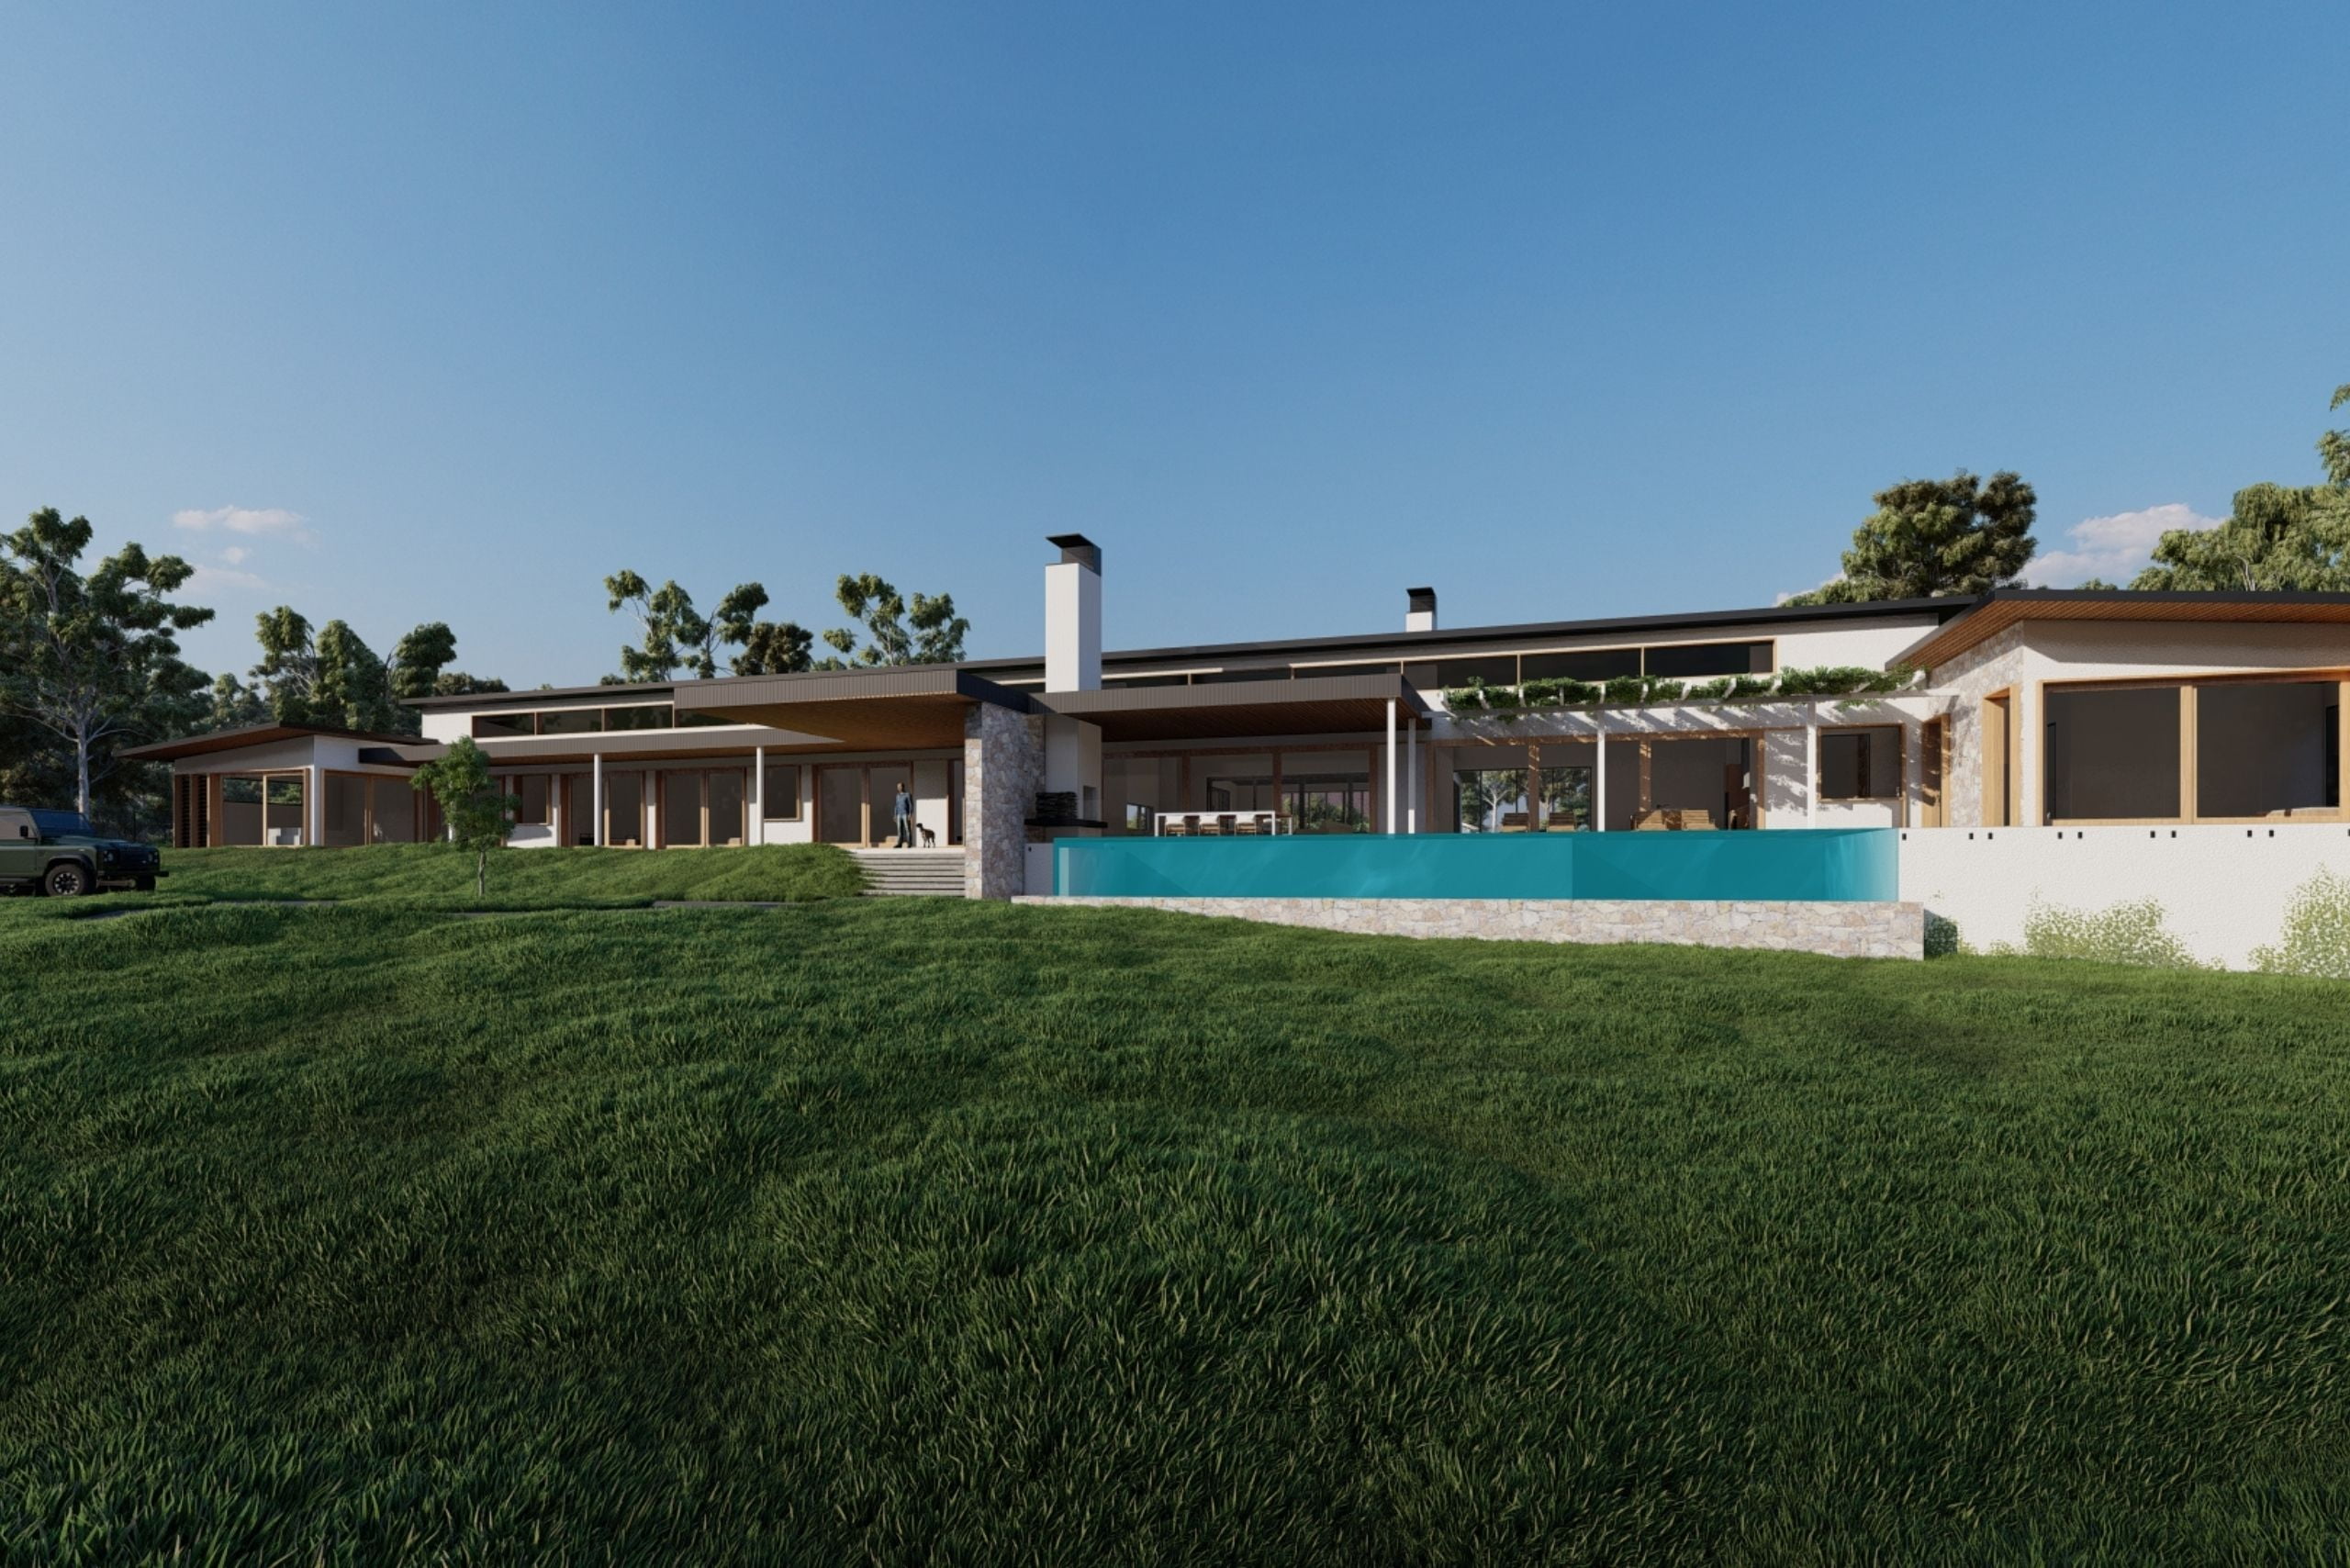 Photo of a modern beautiful house with a pool | featured image for Chandler Estate.